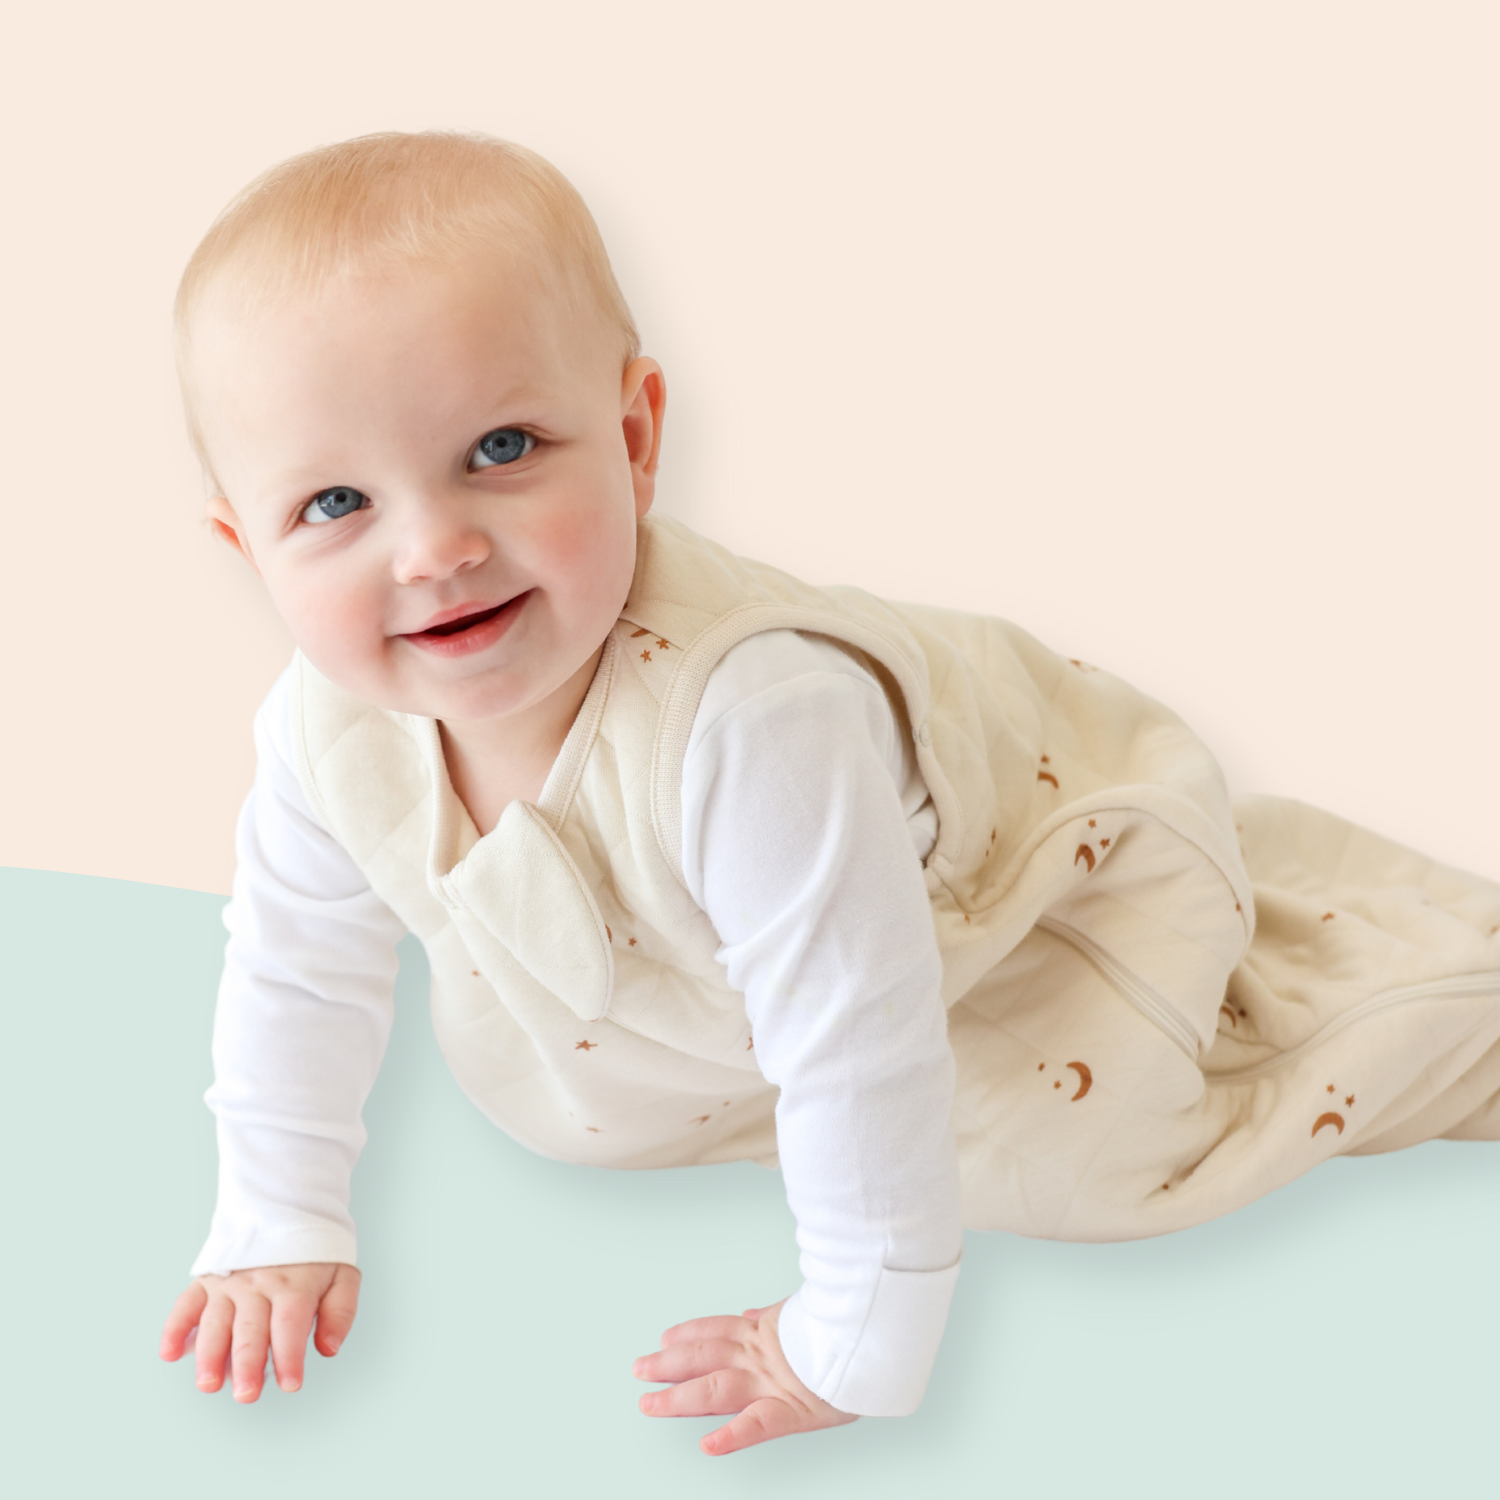 TEALBEE | Softest Baby and Toddler Sleepsack With Feet